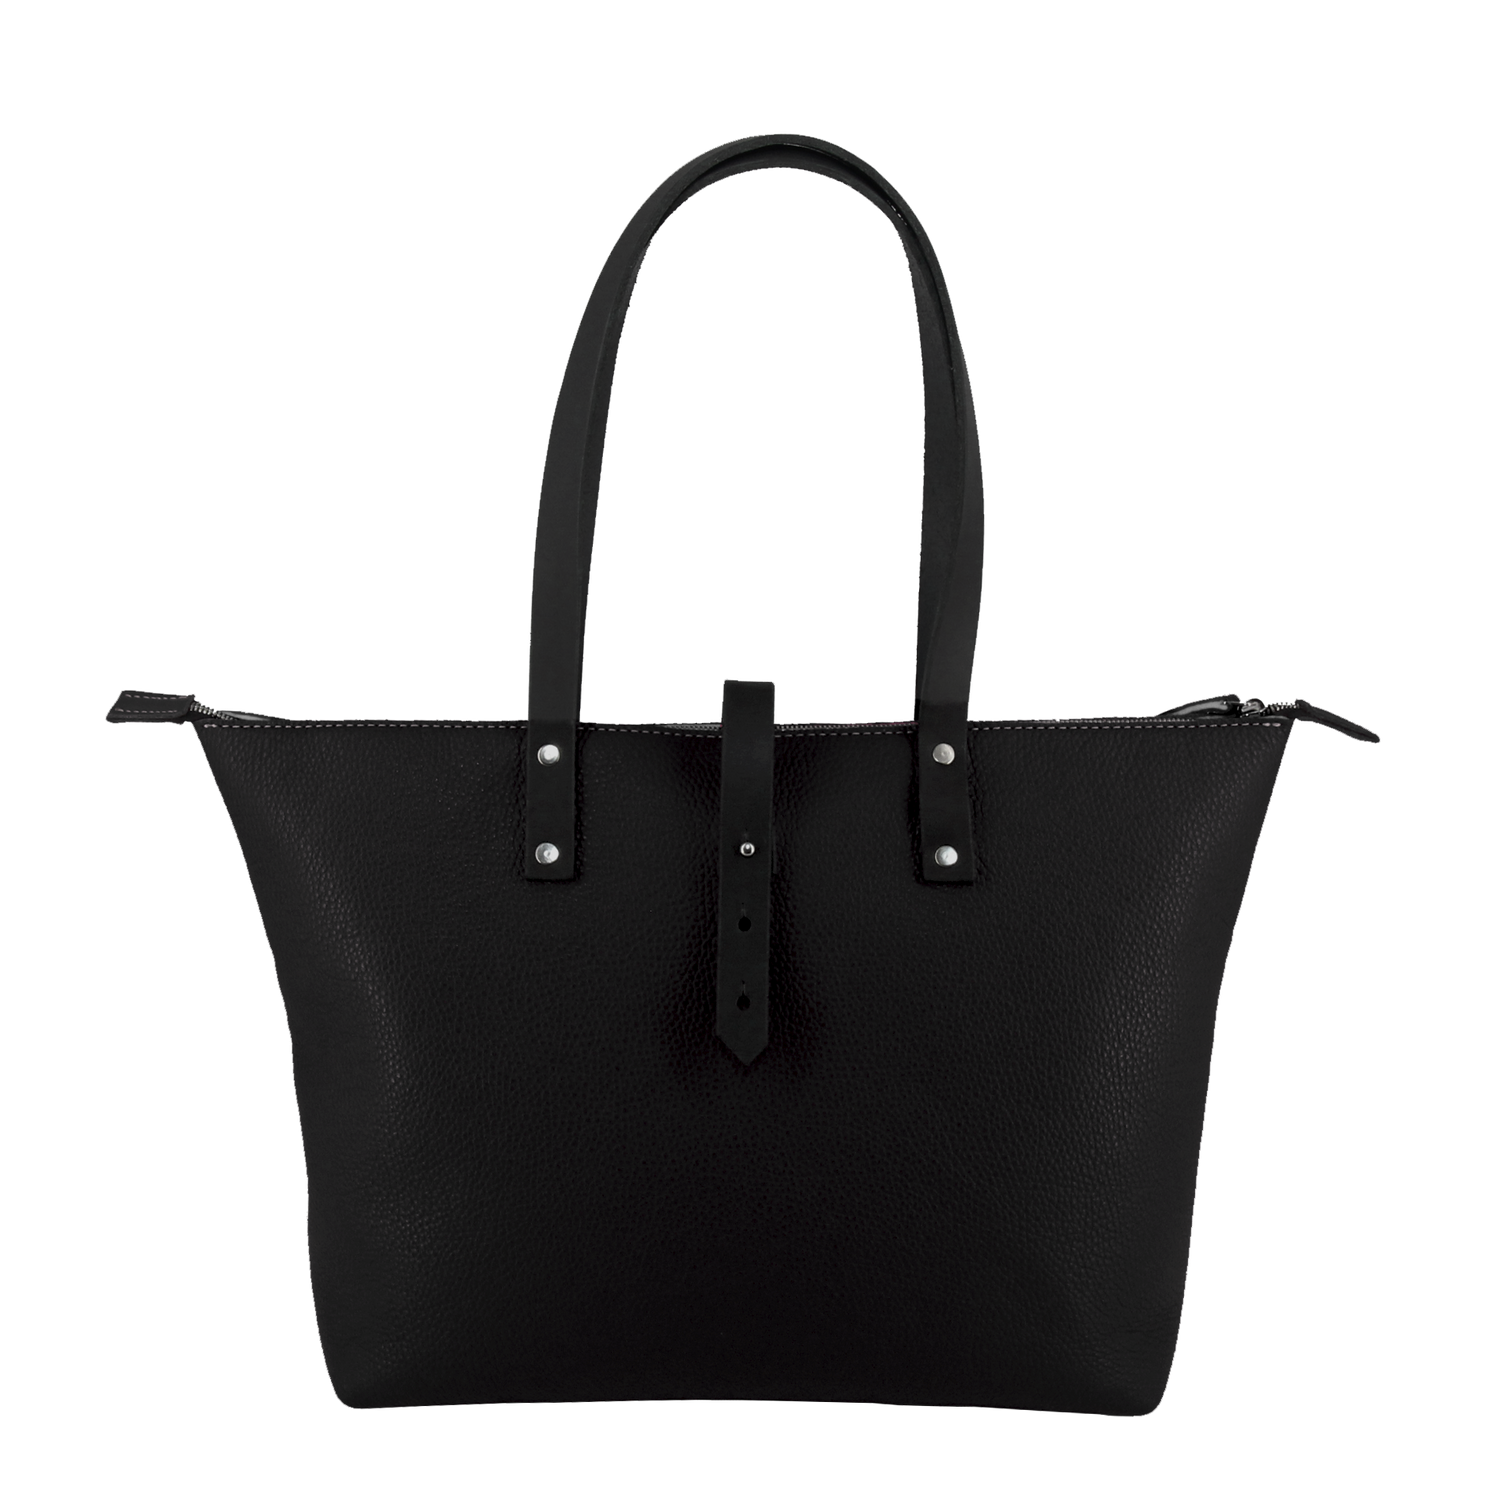 Italian Leather Tote with Wool Felt and Zip - Black and Black - RYAN London